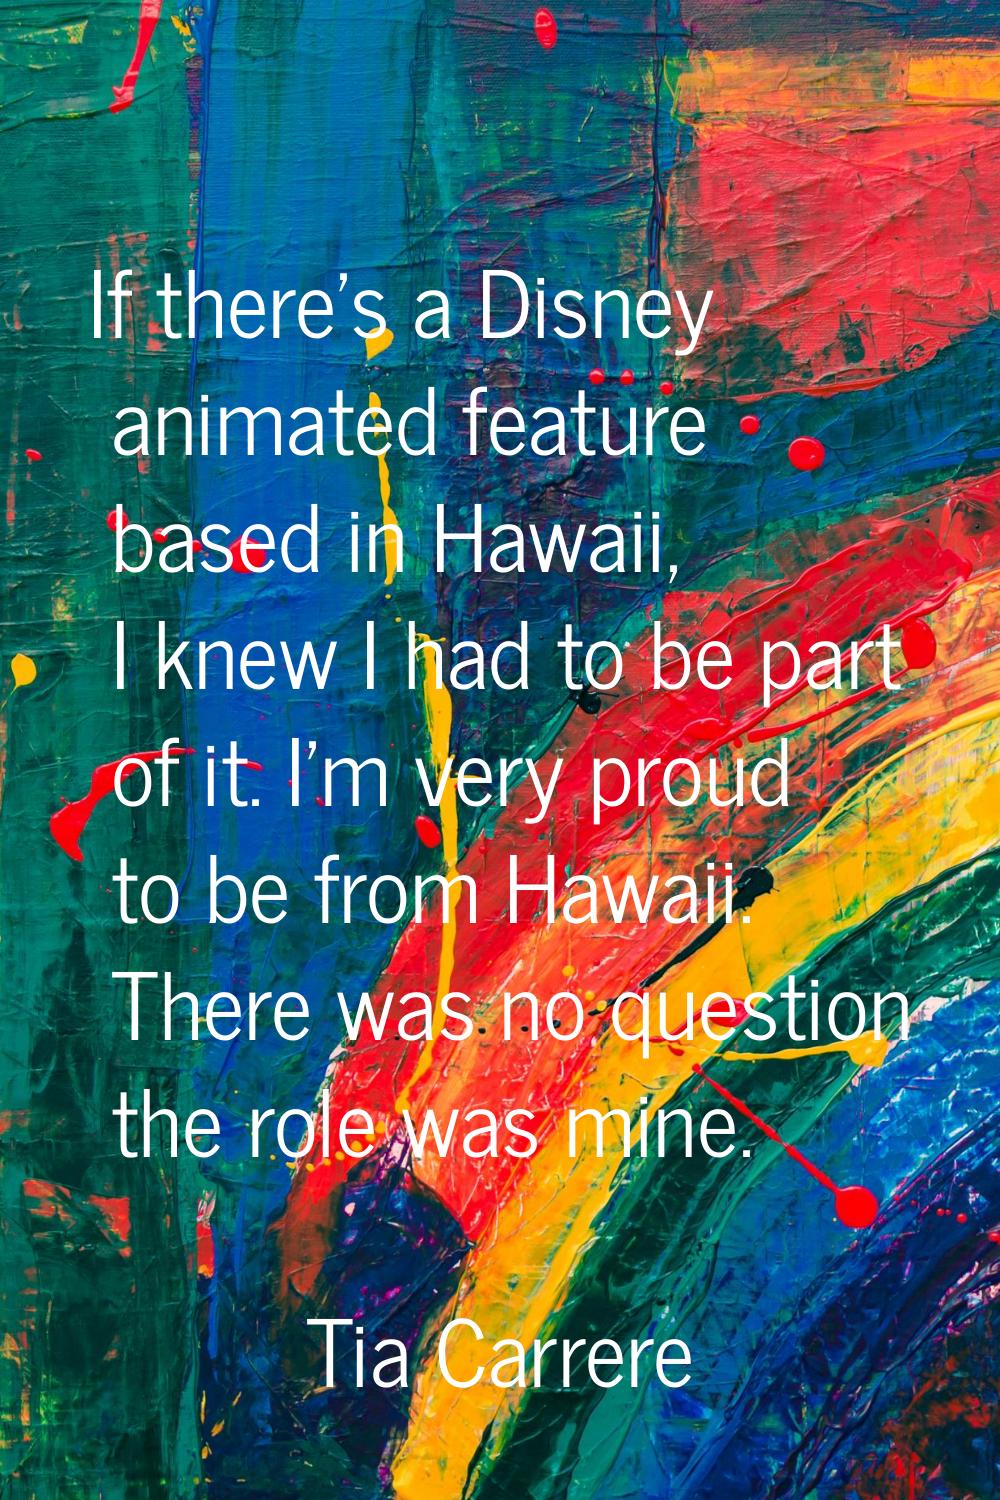 If there's a Disney animated feature based in Hawaii, I knew I had to be part of it. I'm very proud